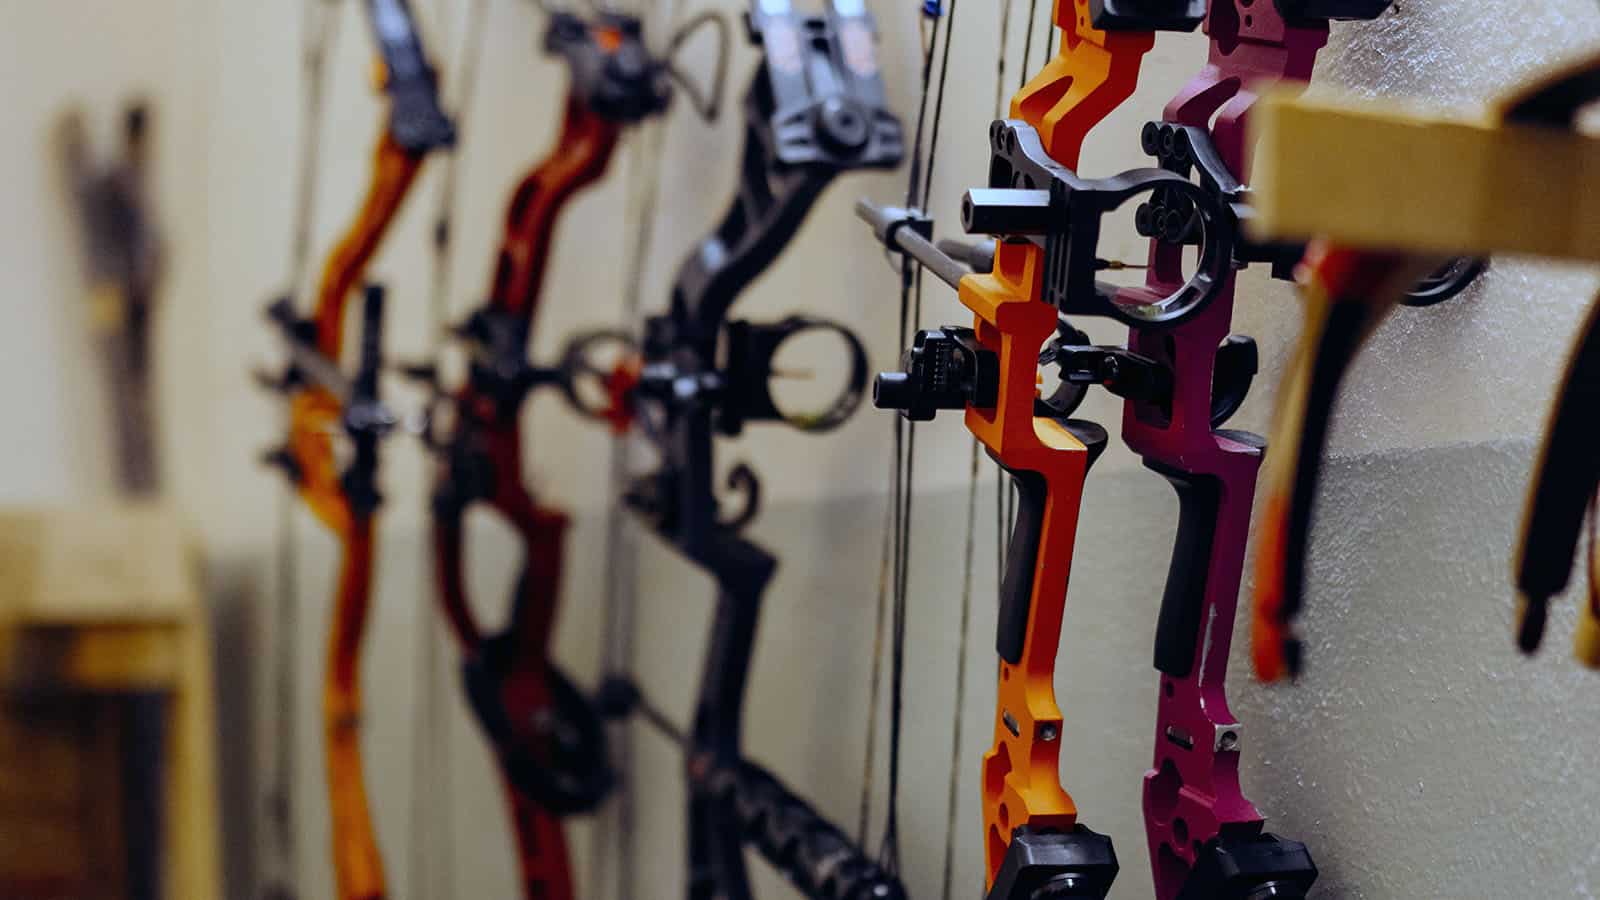 Select the Perfect Arrow Length for Your Bow - A Note on Compound Bow Draw Length